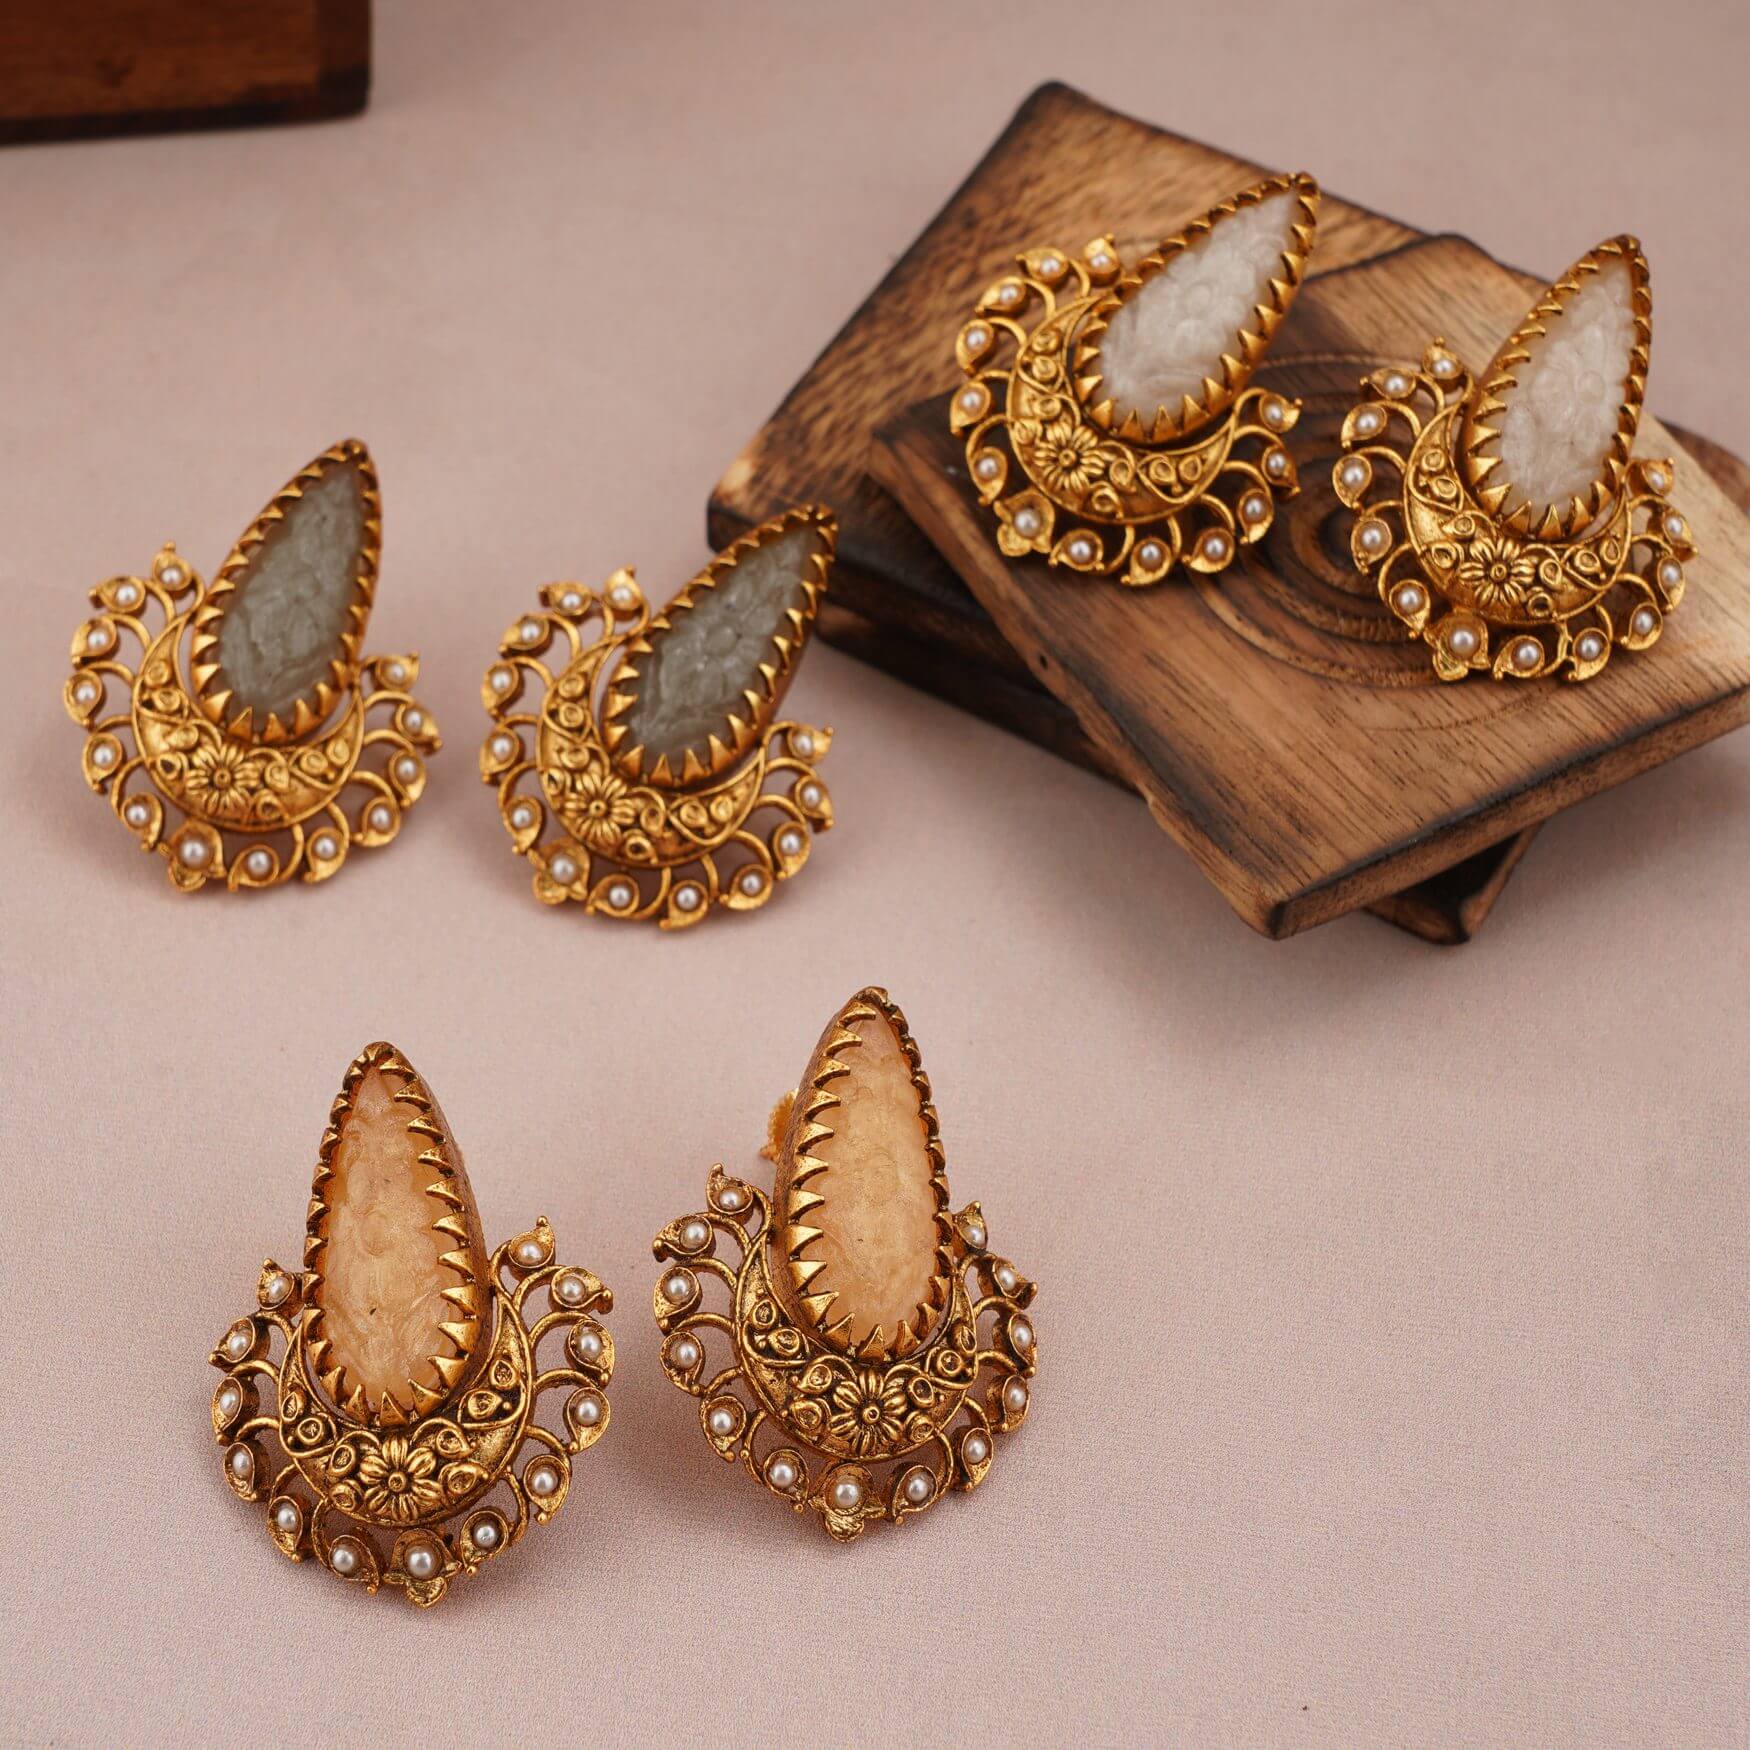 Best Earrings for Your Face Shape and Style